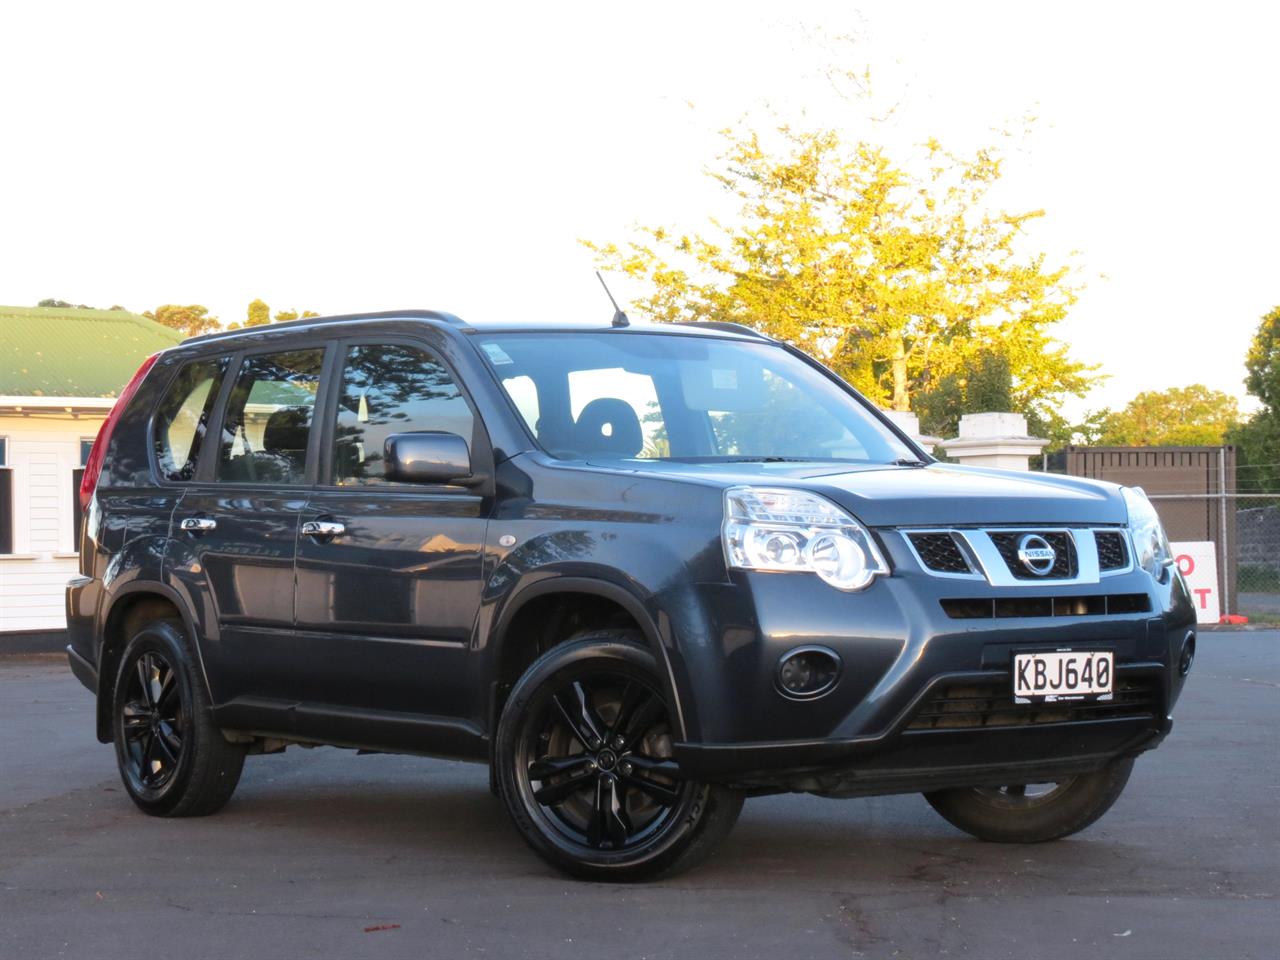 NZC 2013 Nissan X-TRAIL just arrived to Auckland